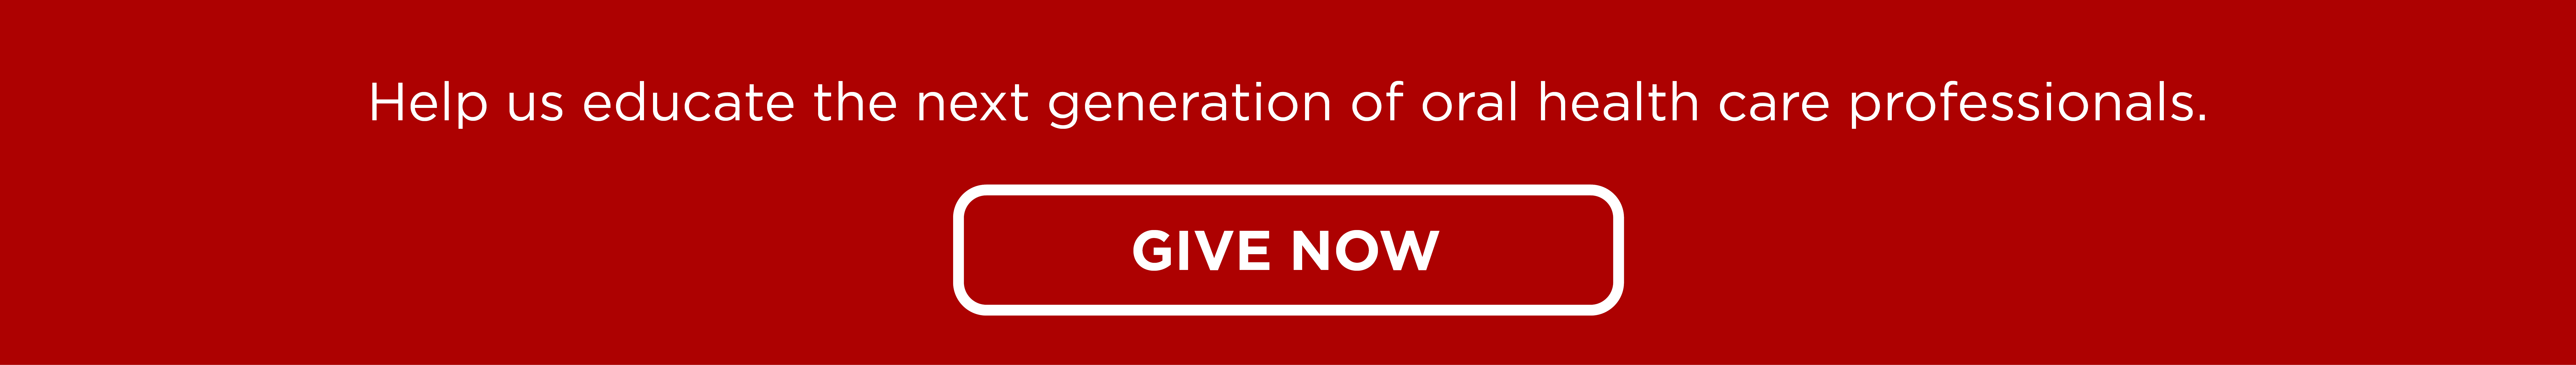 Help us educate the next generation of oral health care professionals. Give Now. 